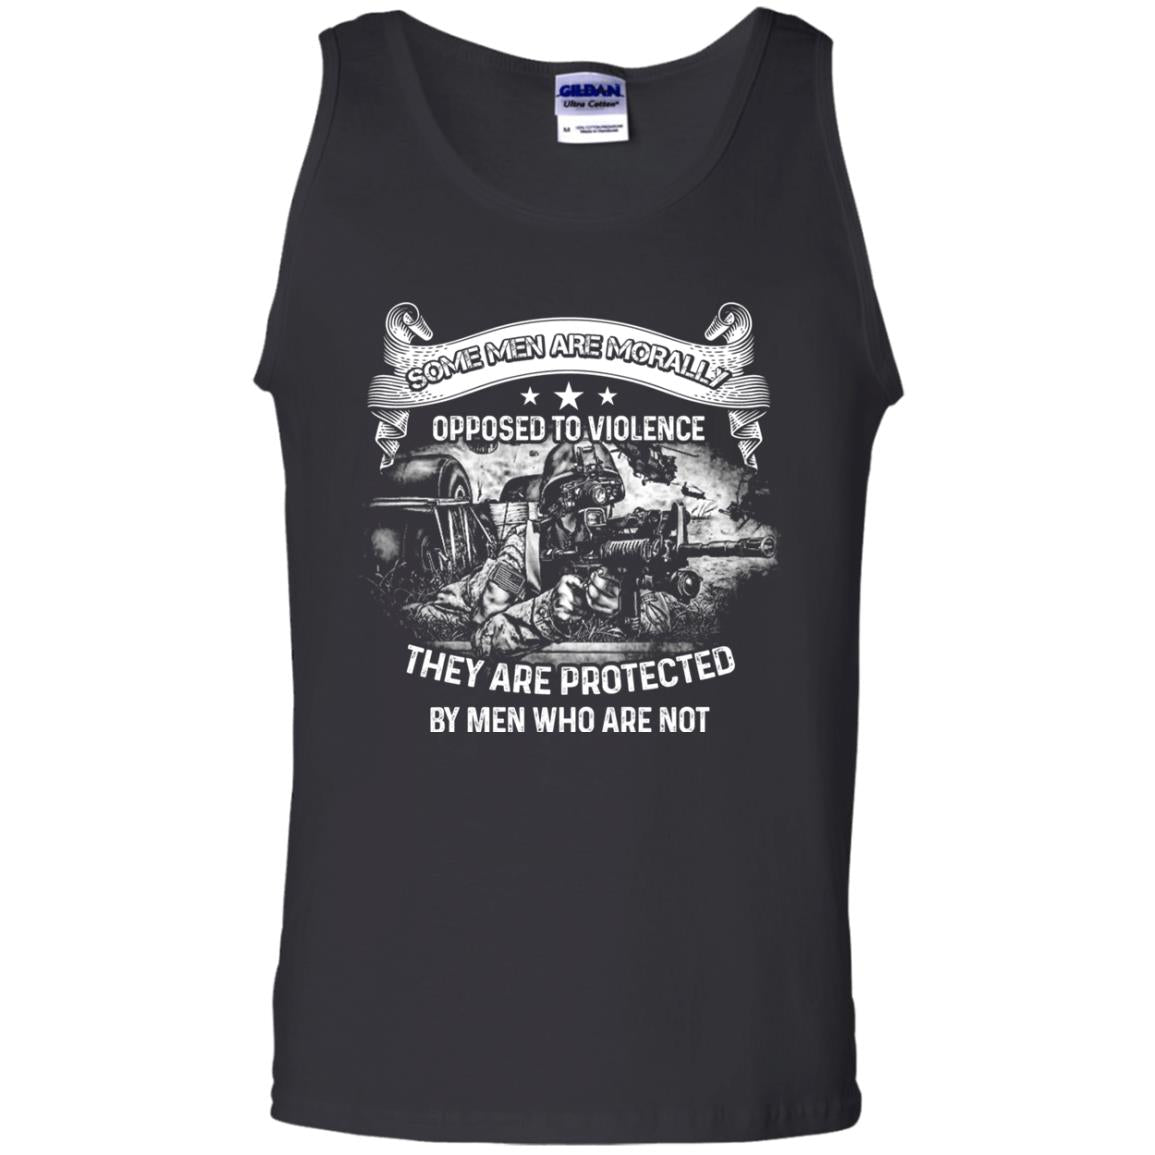 Some Men Are Morally Opposed To Violence They Are Protected By Men Who Are NotG220 Gildan 100% Cotton Tank Top